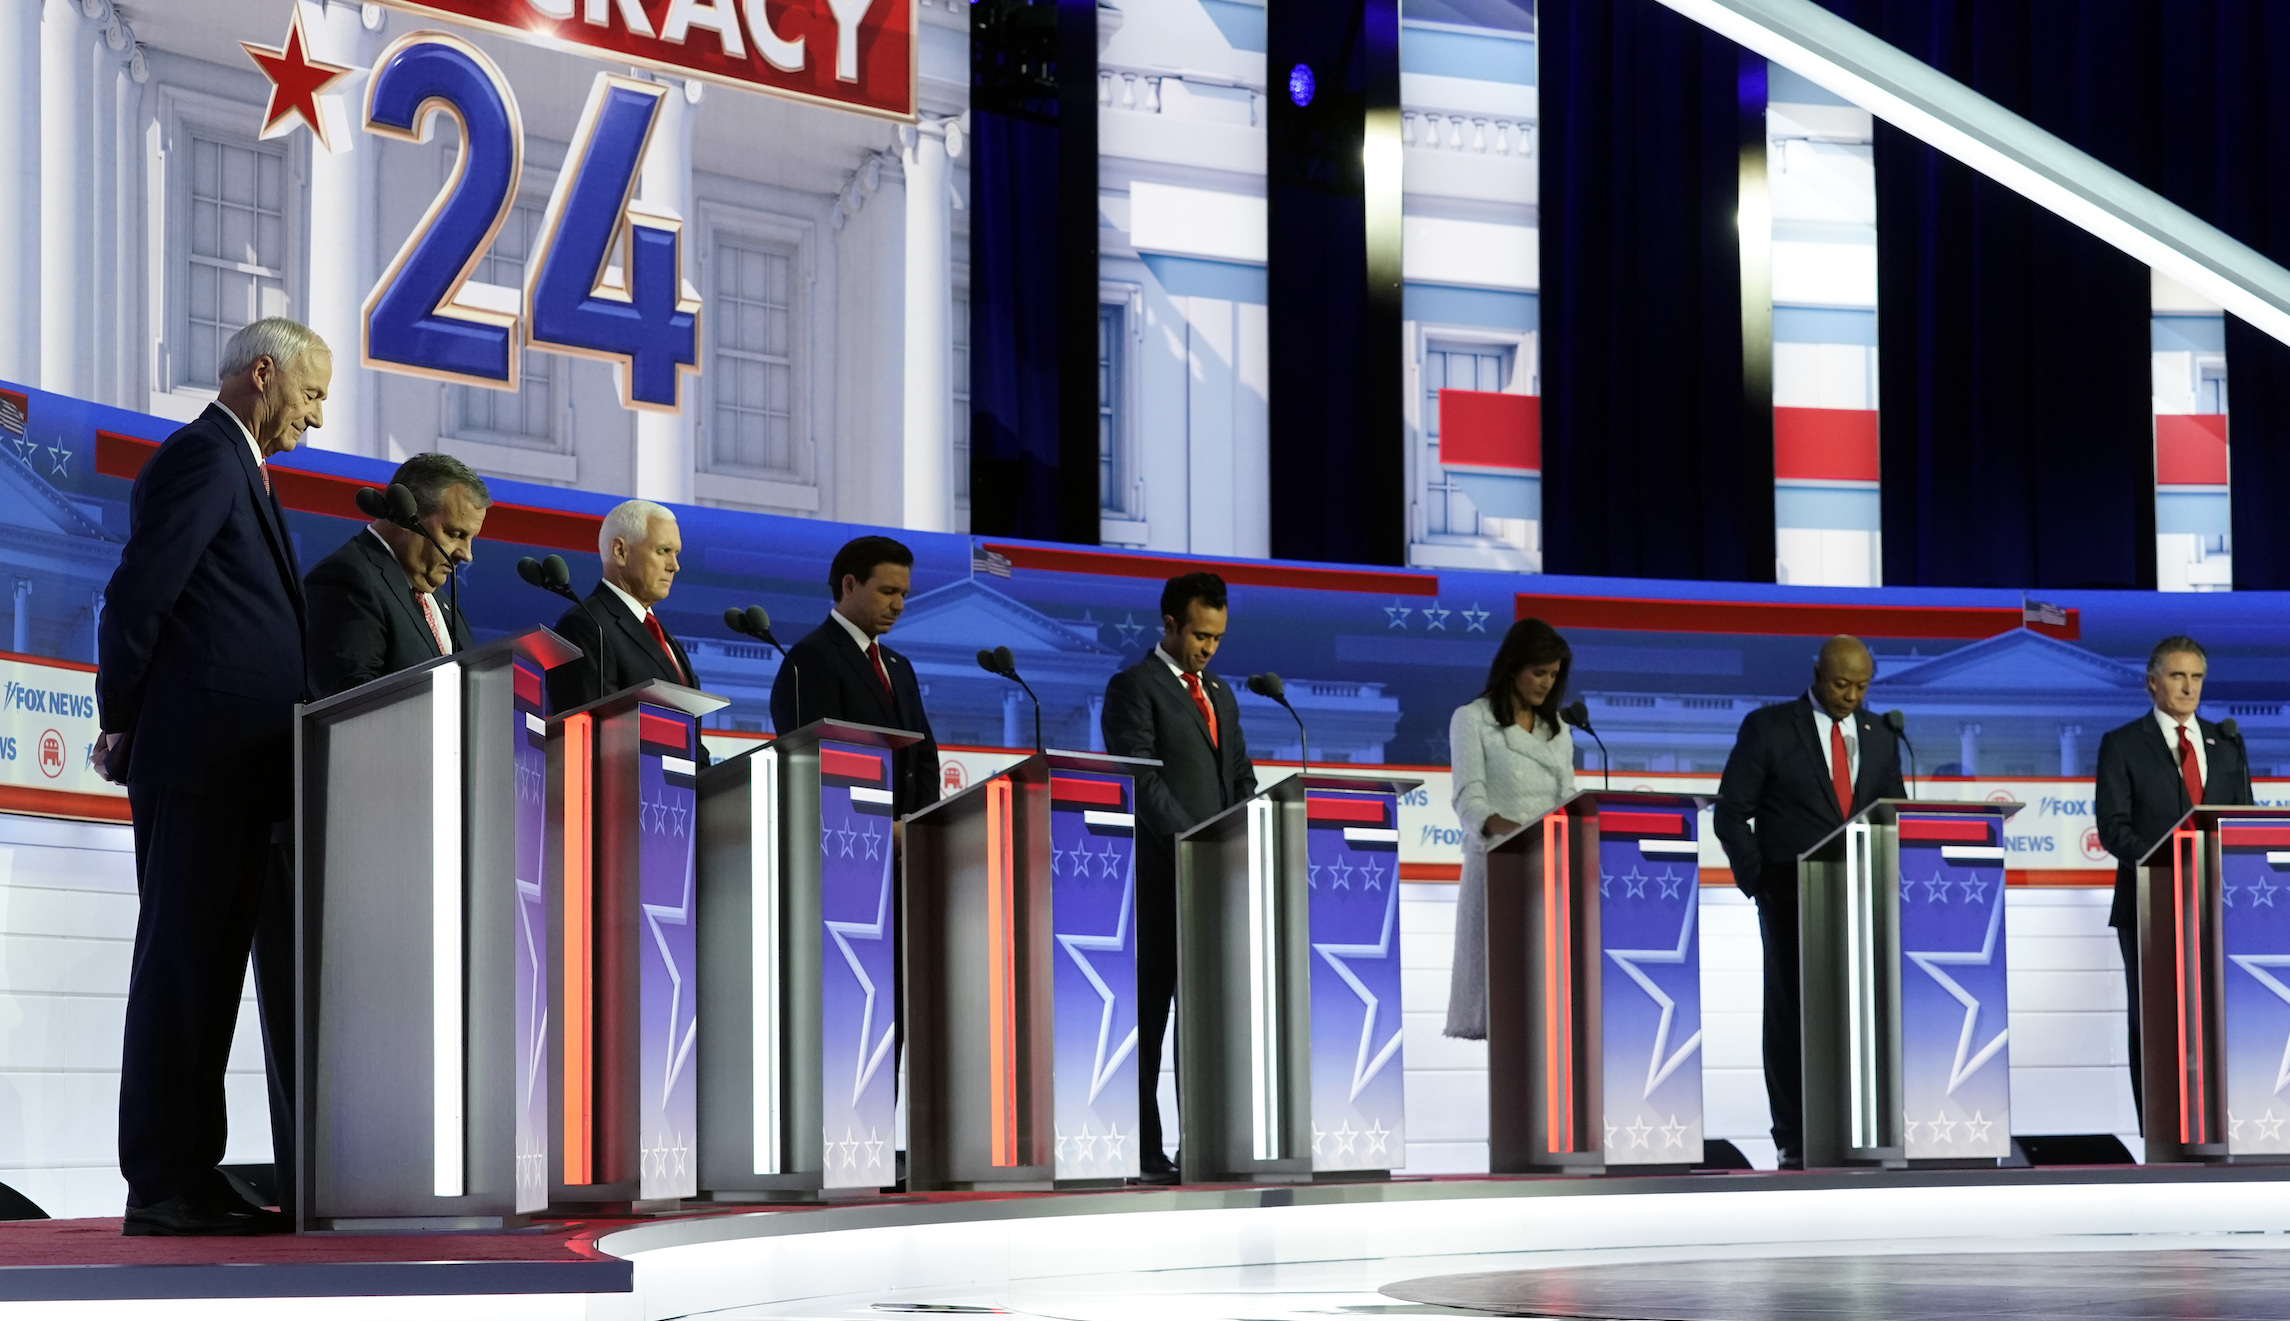 Republican Debate Six Of The Eight Candidates Raise Hands To Support Trump If Convicted 8865